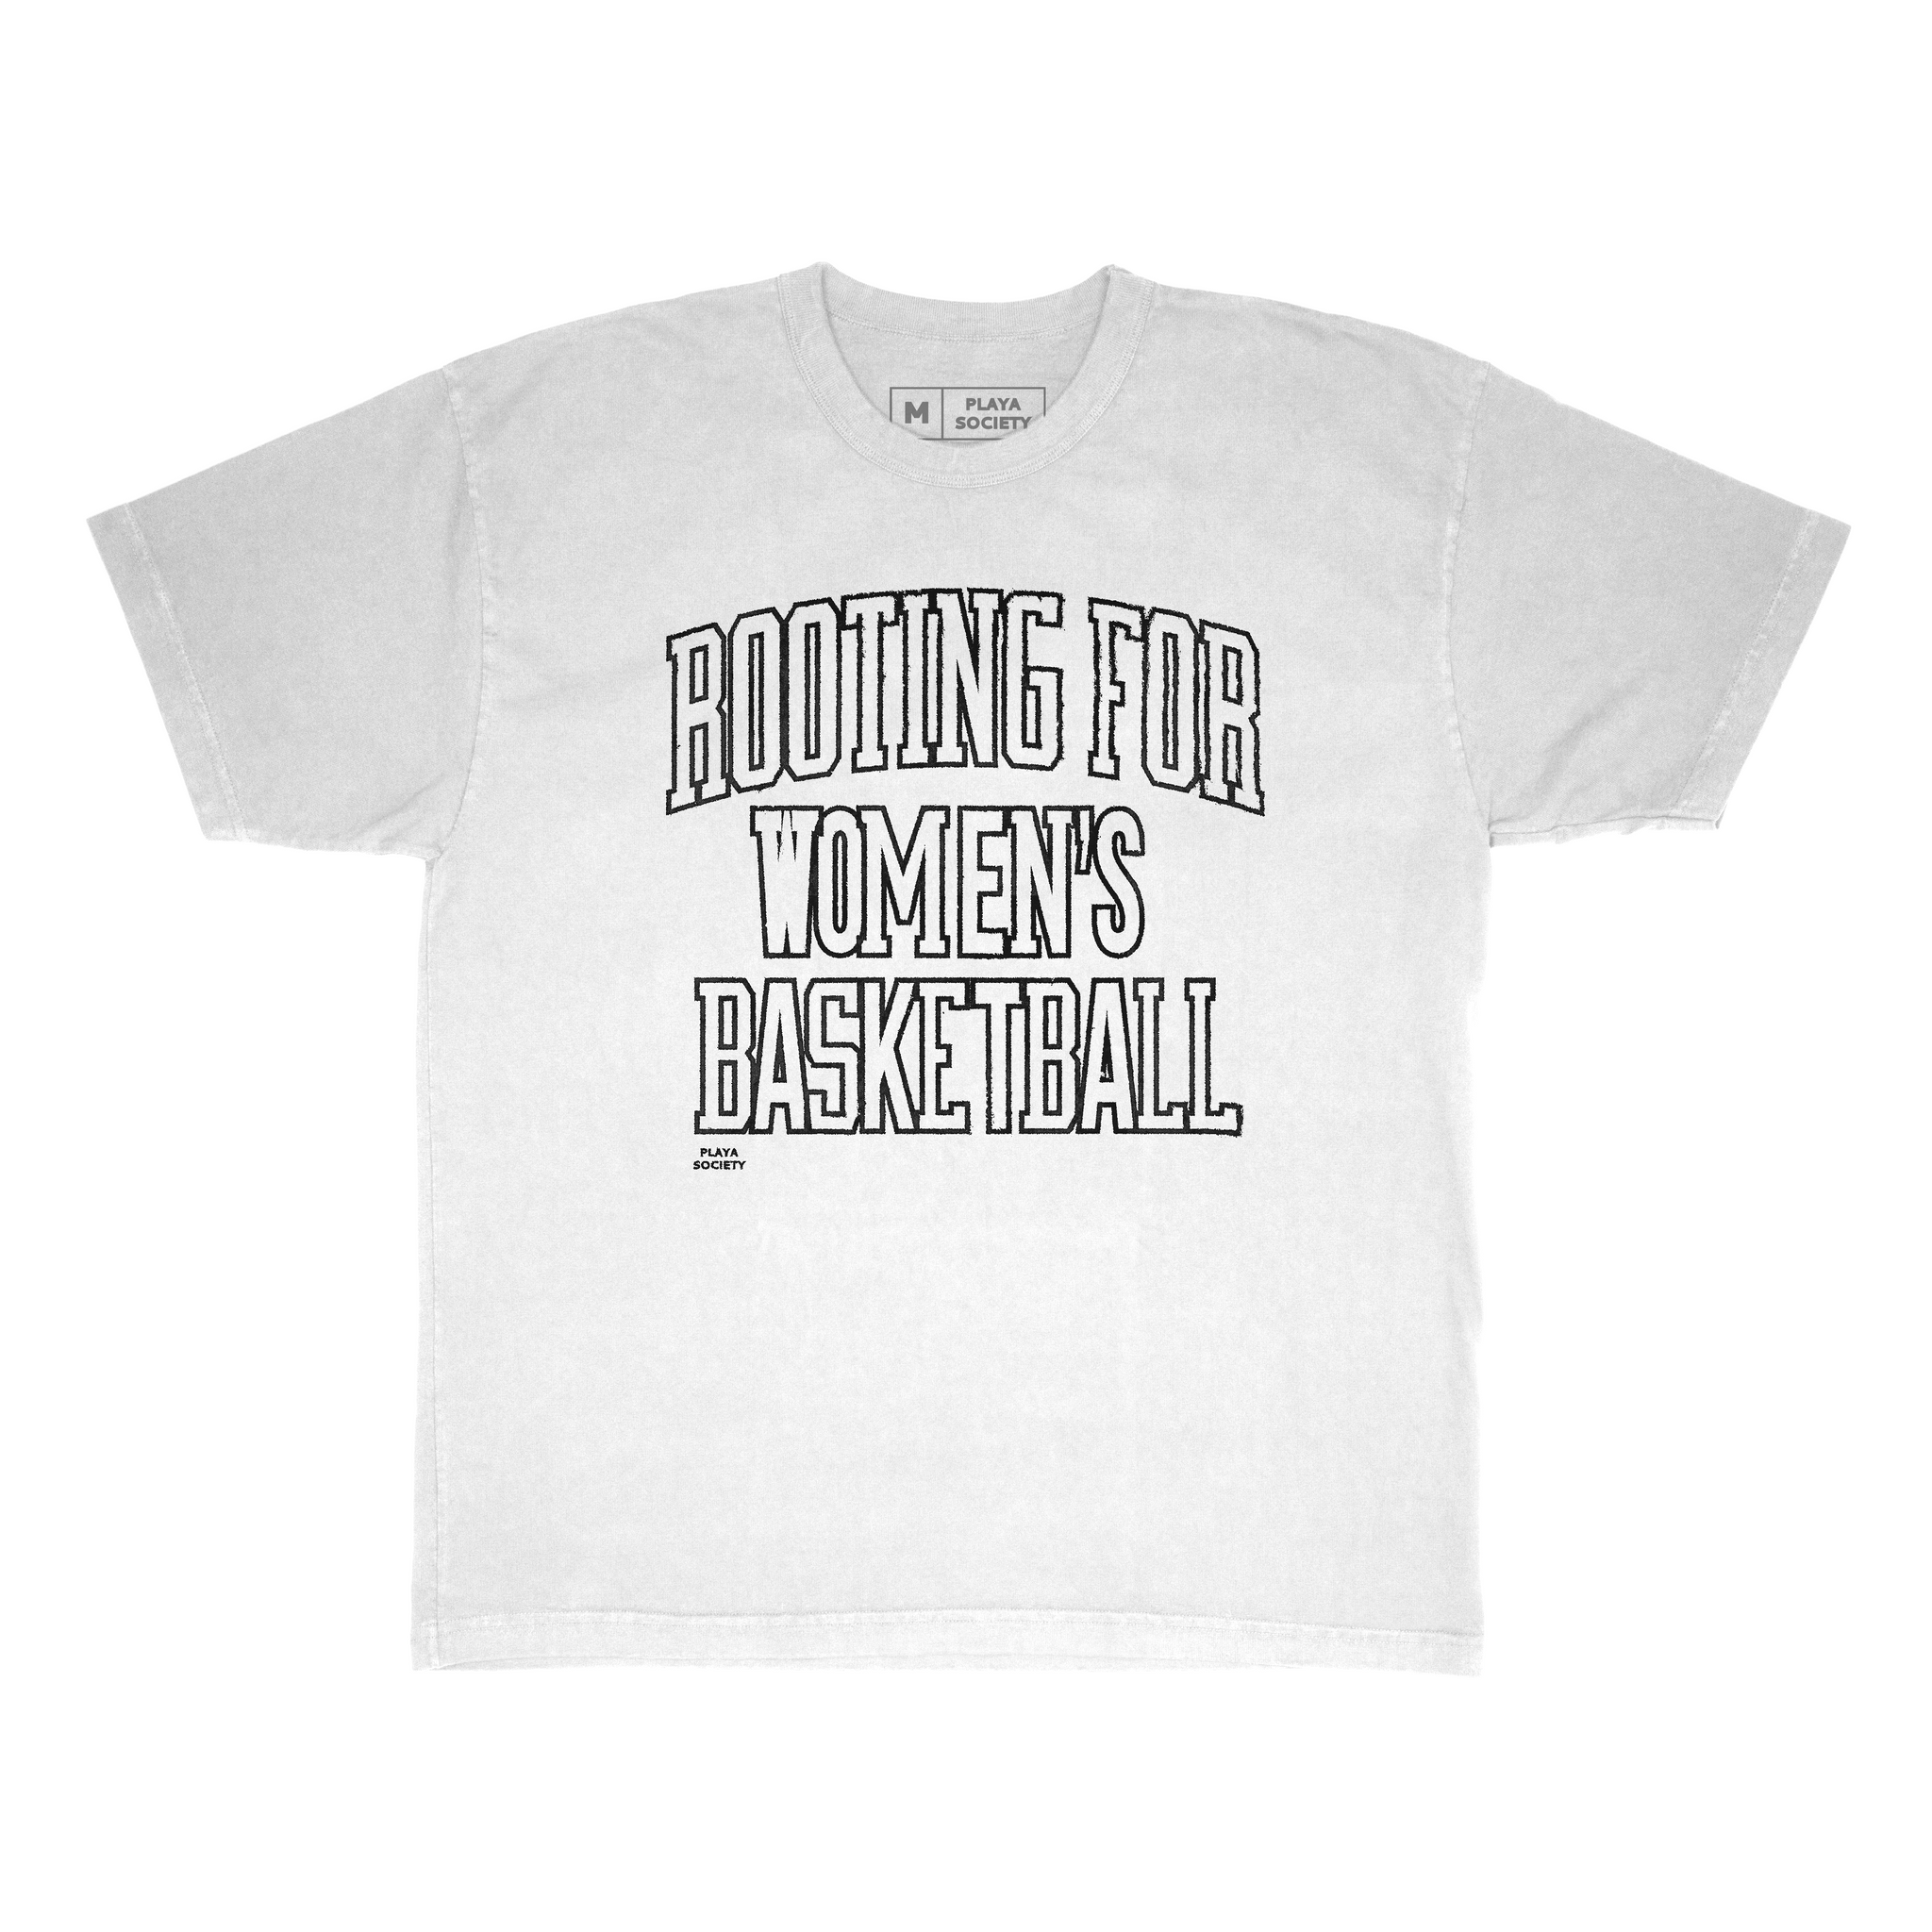 Rooting For WBB T-Shirt